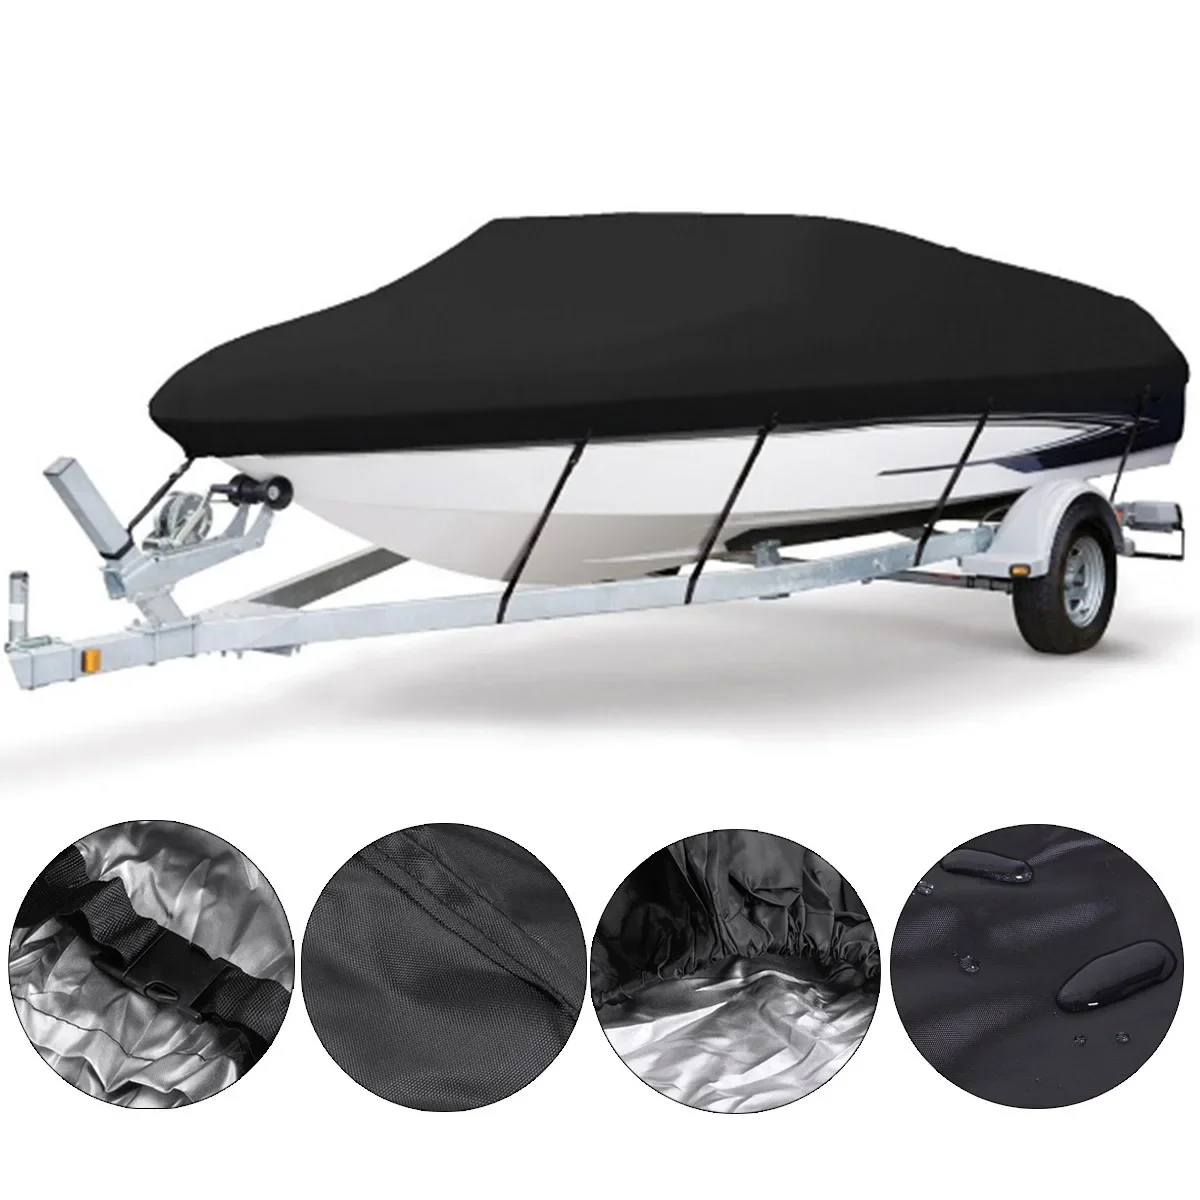 

210D 11-13/14-16/17-19/20-22ft barco Boat Cover Anti-UV Waterproof Heavy Duty Marine Trailerable Canvas Boat Accessories